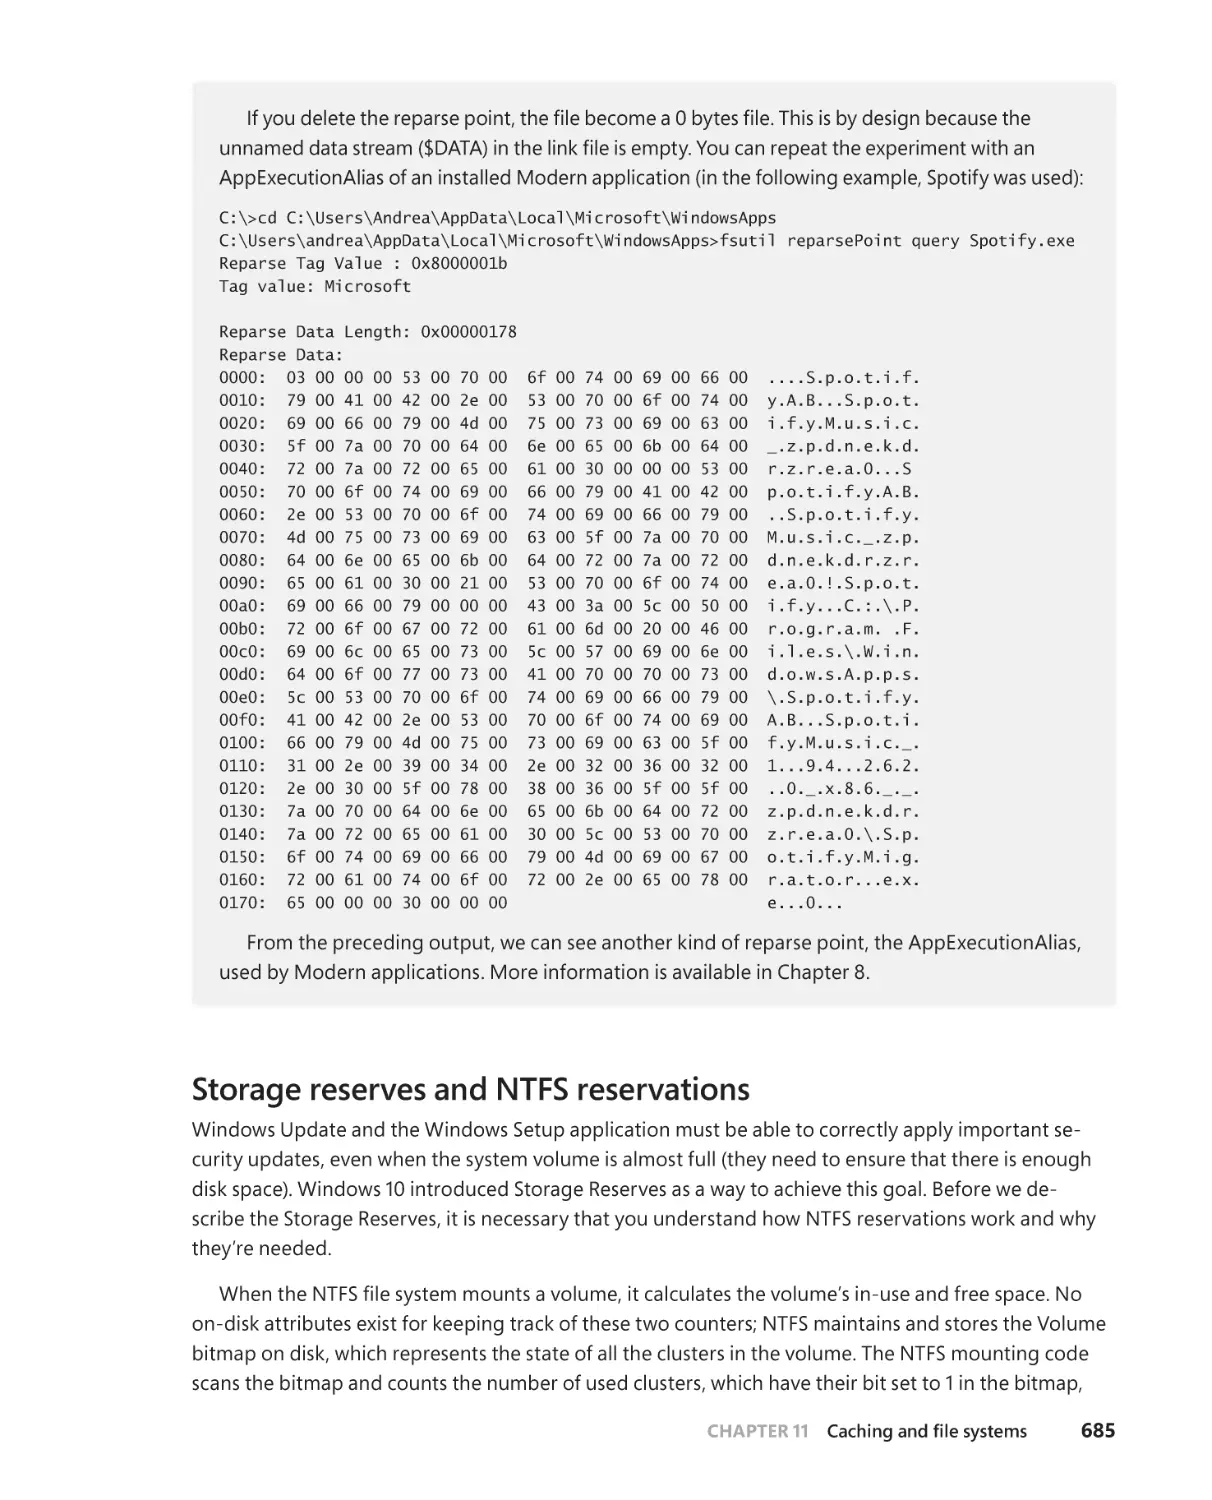 Storage reserves and NTFS reservations